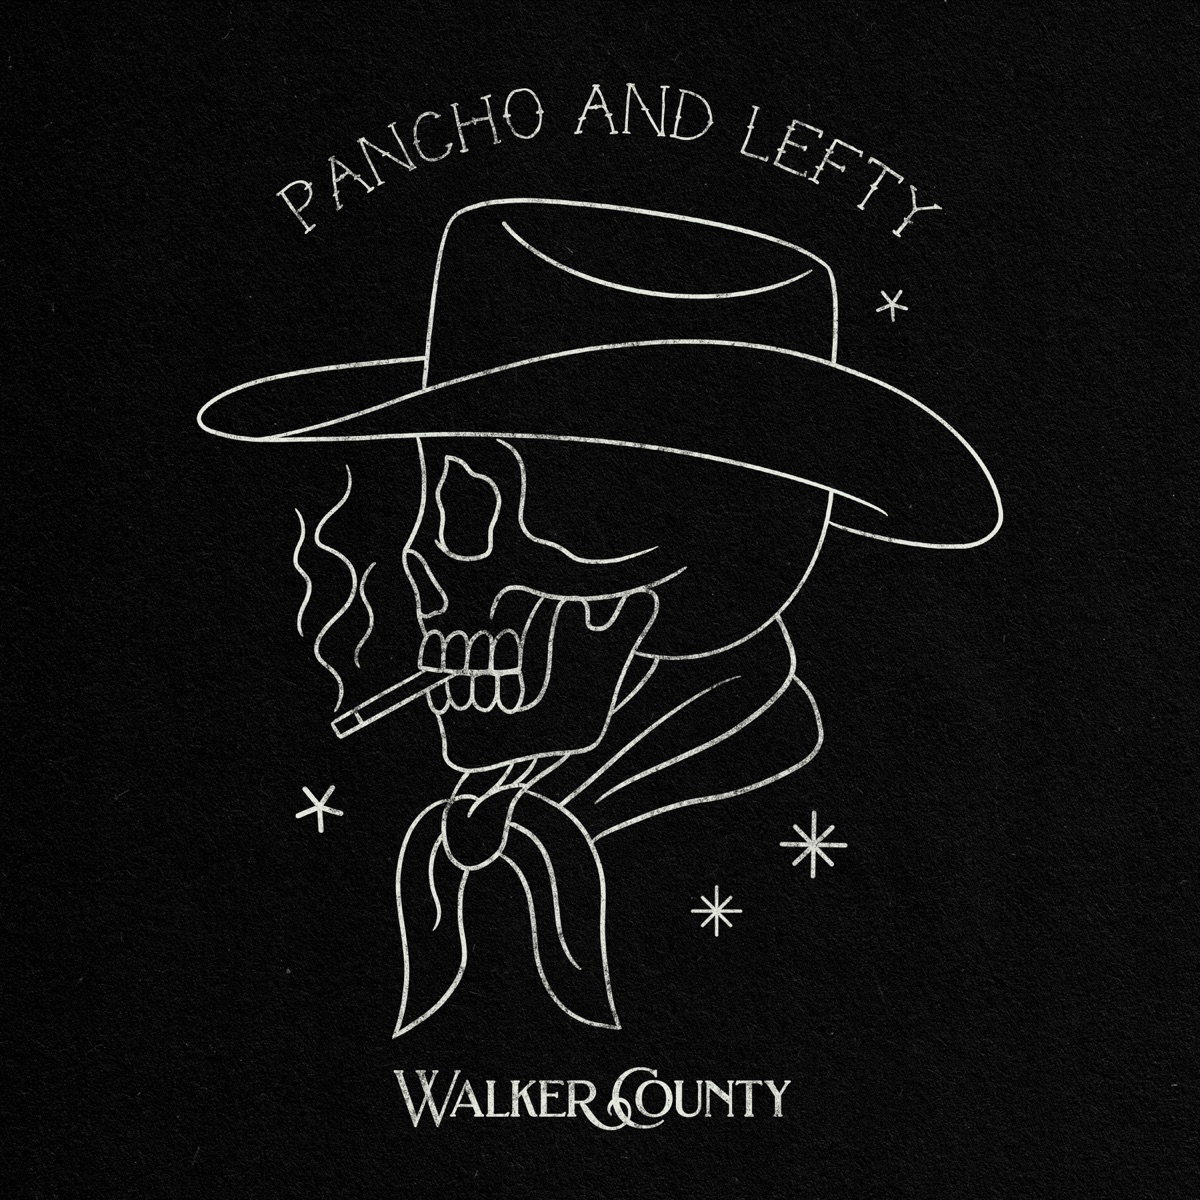 Pancho and Lefty - Single - Album by Walker County - Apple Music